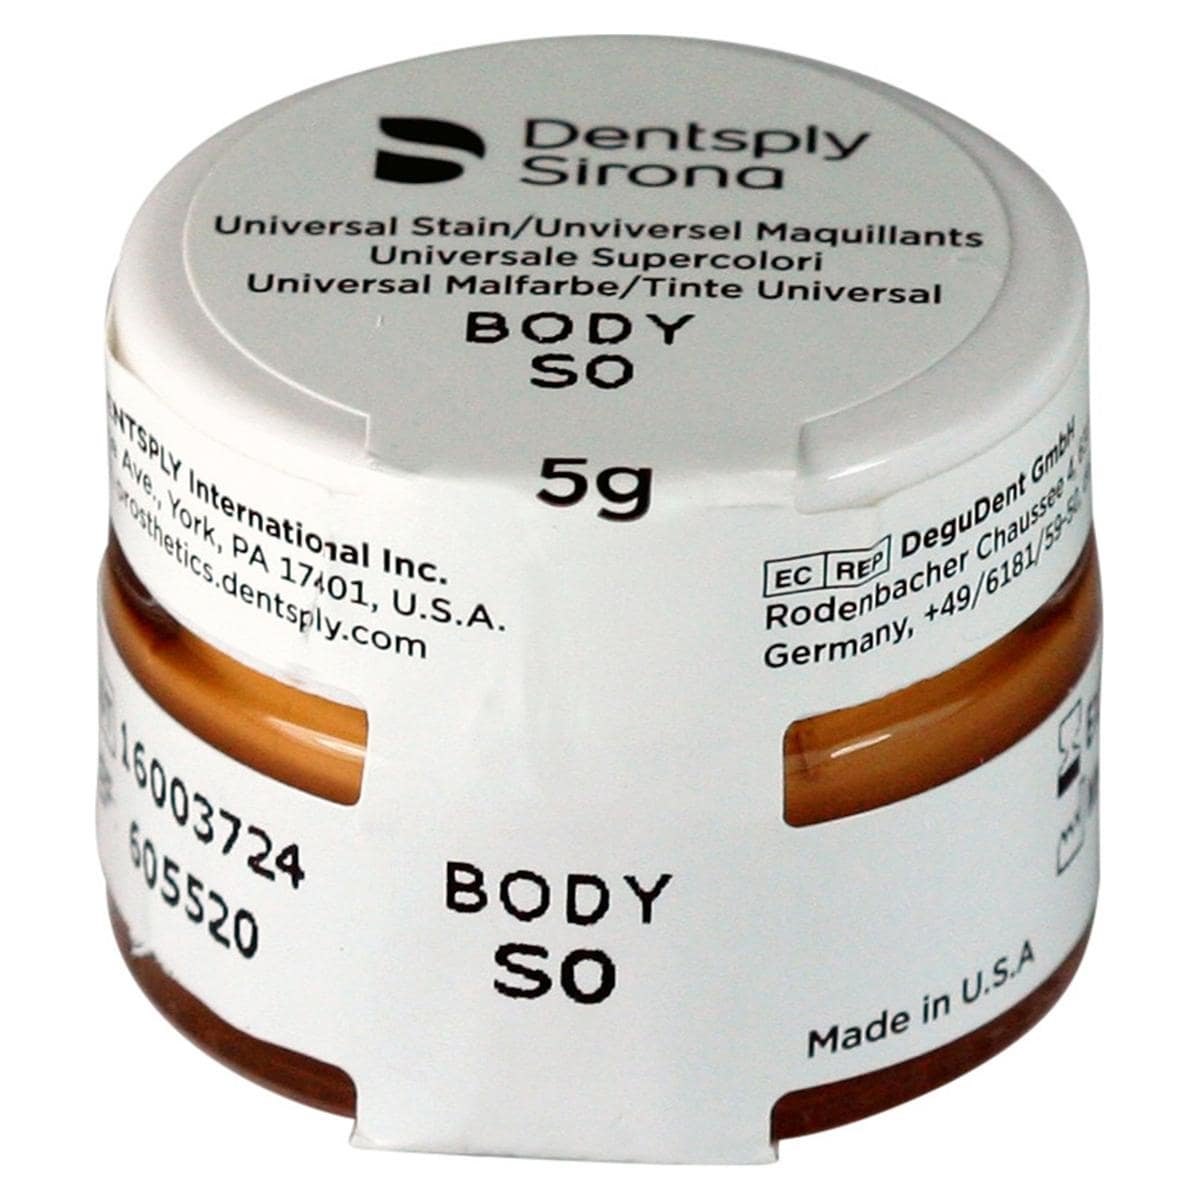 DS Universal Body Stain - S0, Packung 5 g